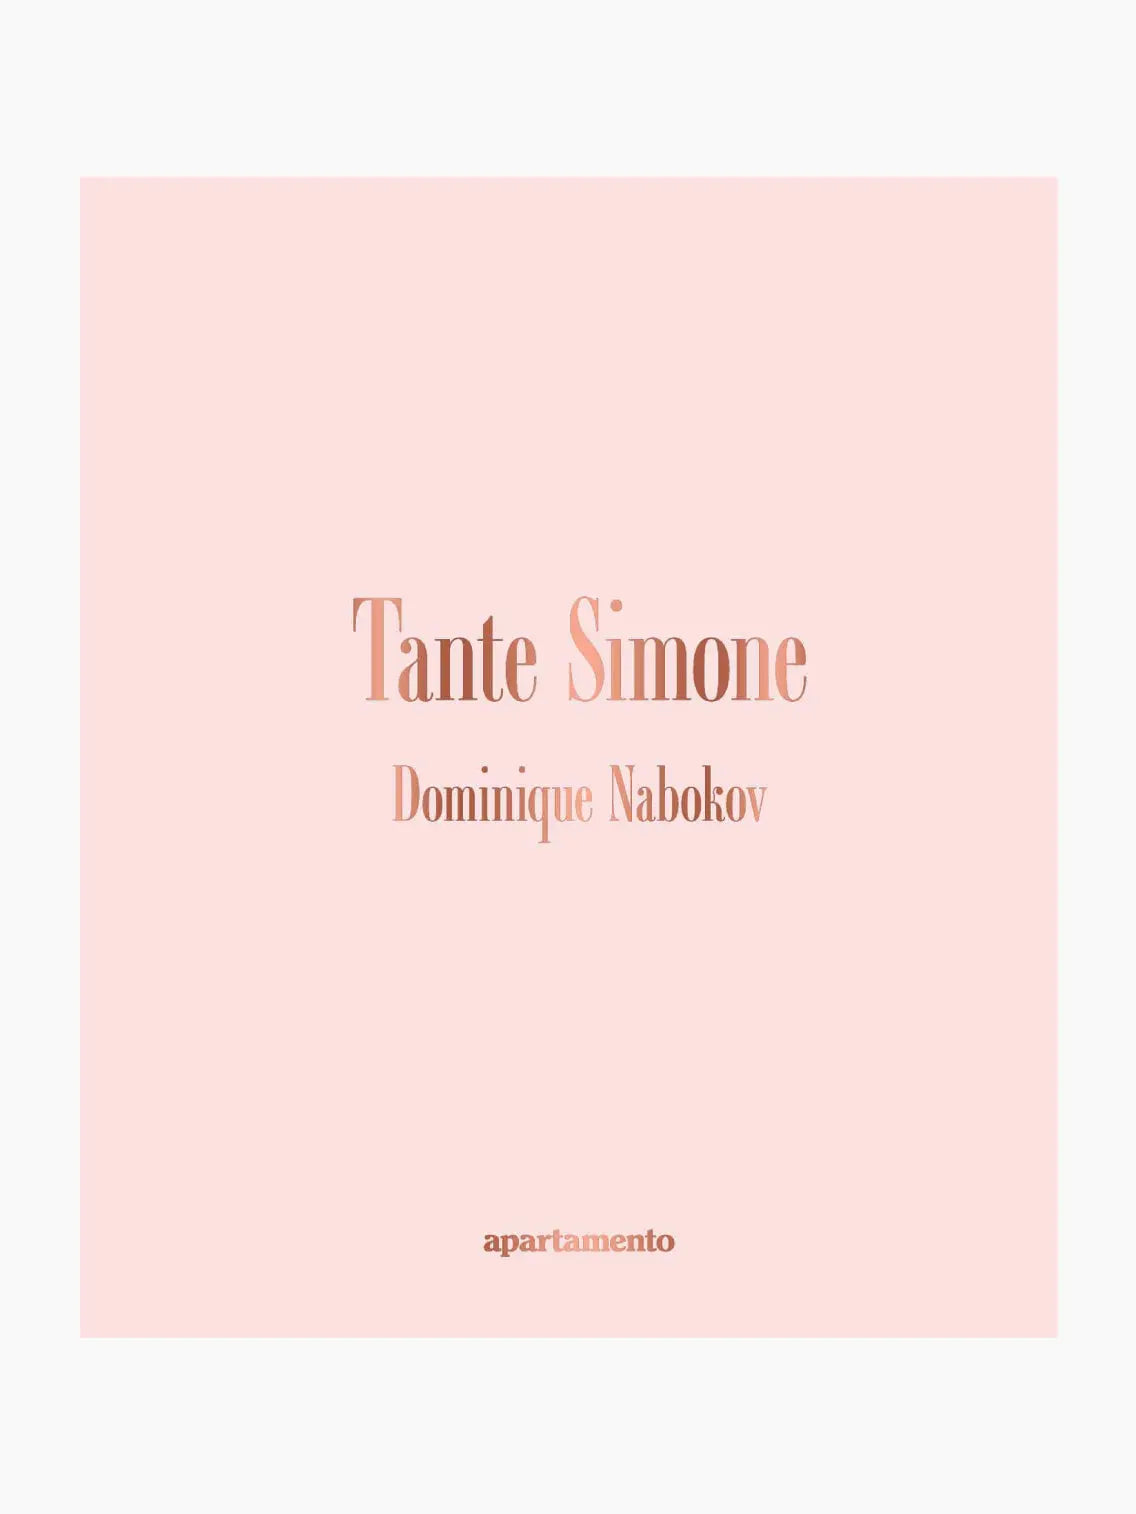 A minimalist book cover with a light pink background features the text "Tante Simone" in large, elegant font and "Dominique Nabokov" below it in smaller font. At the bottom, in small lowercase letters, is “Apartamento,” reminiscent of a chic store in Barcelona.